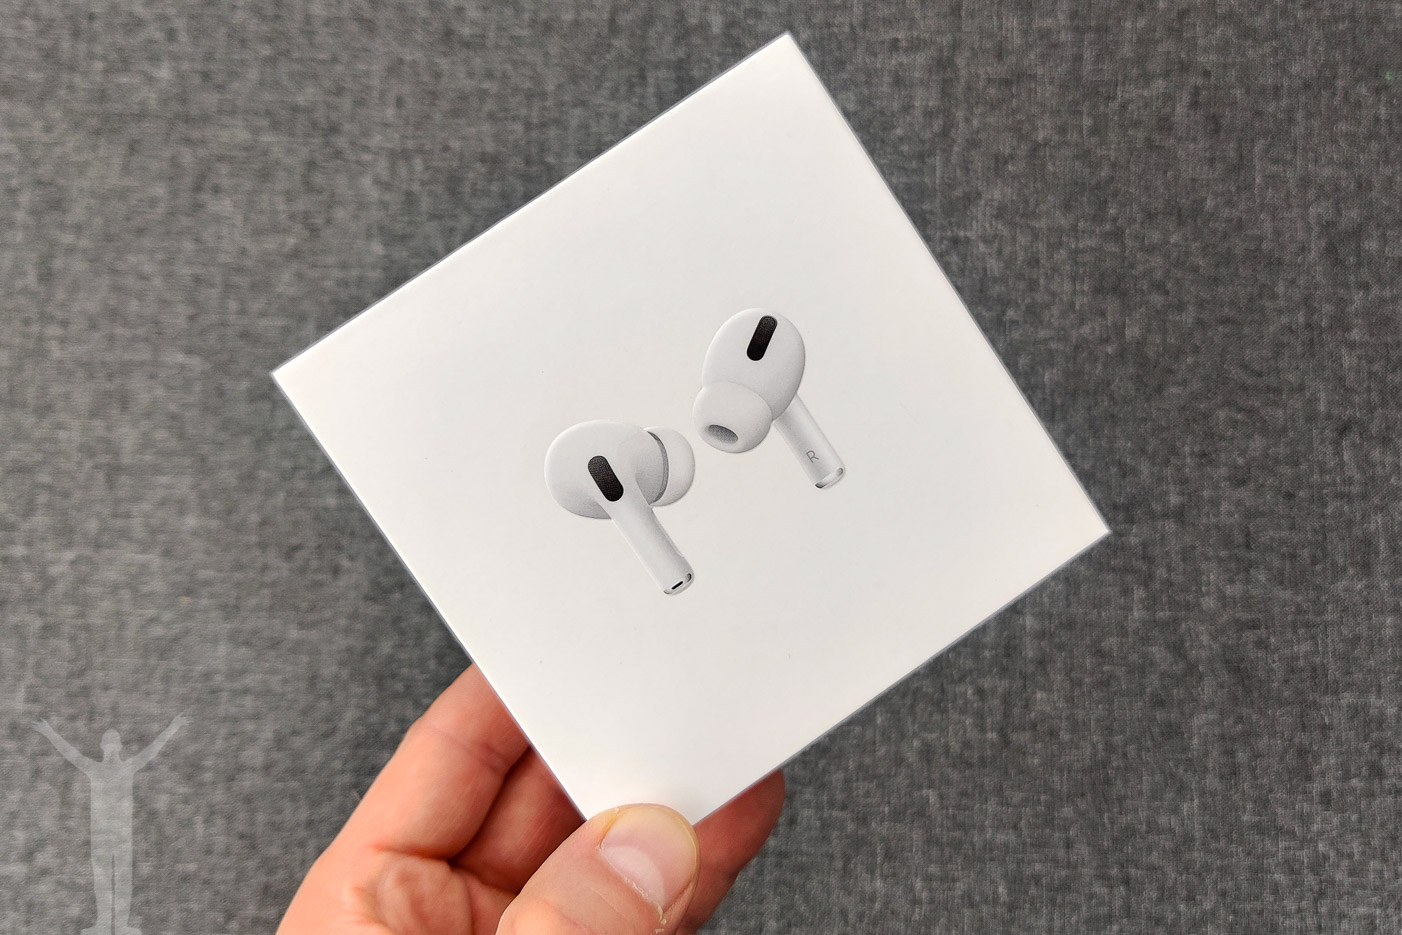 Unboxing Apple Airpods Pro